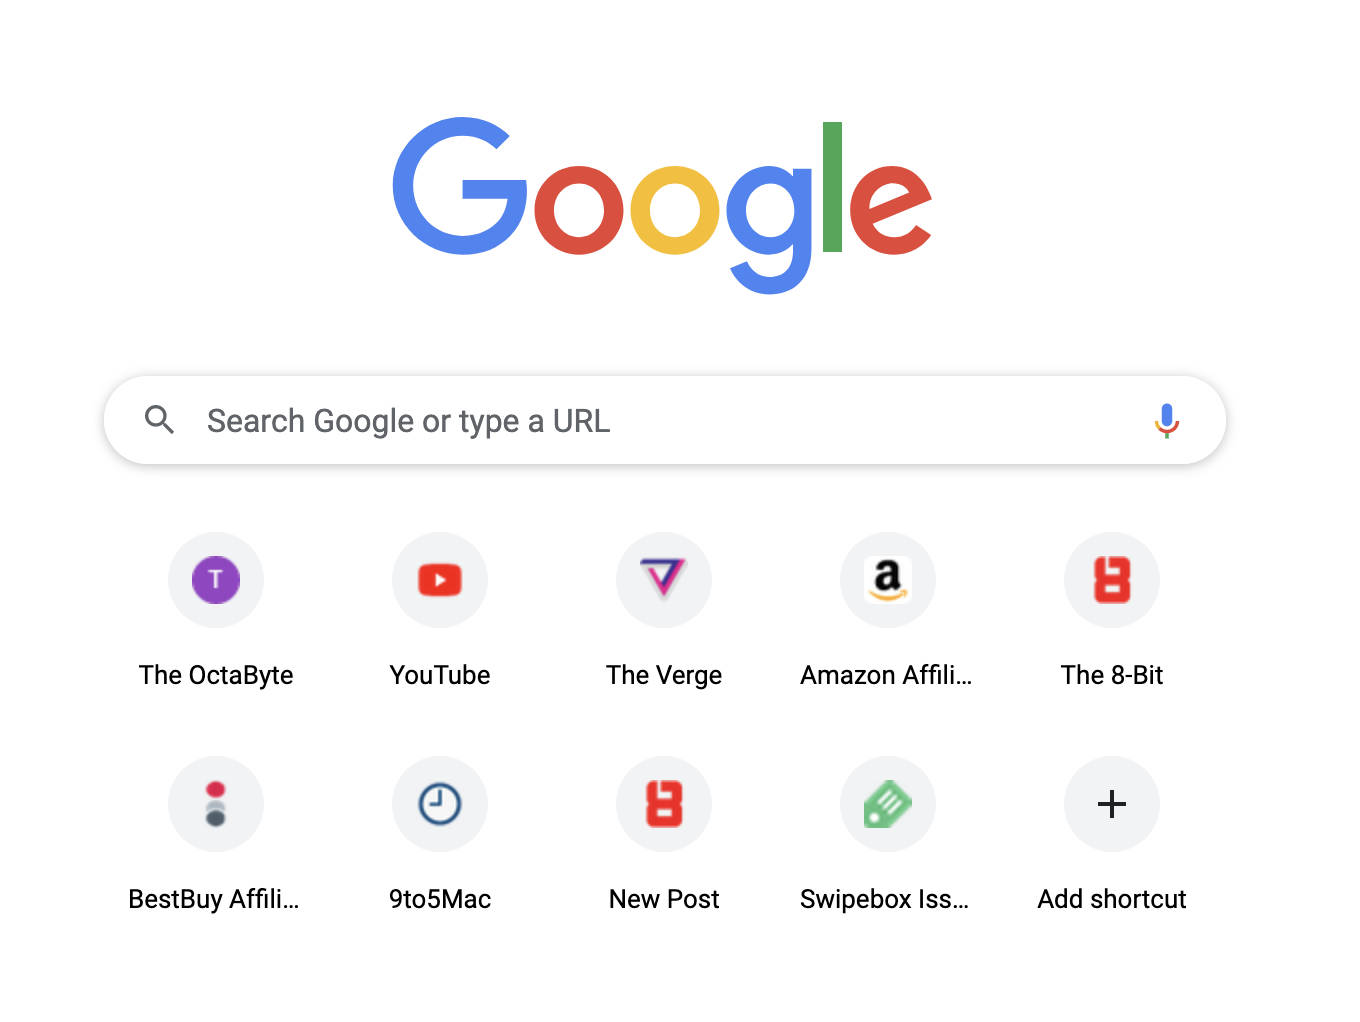 Chrome's Homepage elements including the colossal Google logo, the Omnibox, and frequently visited website thumbnails.